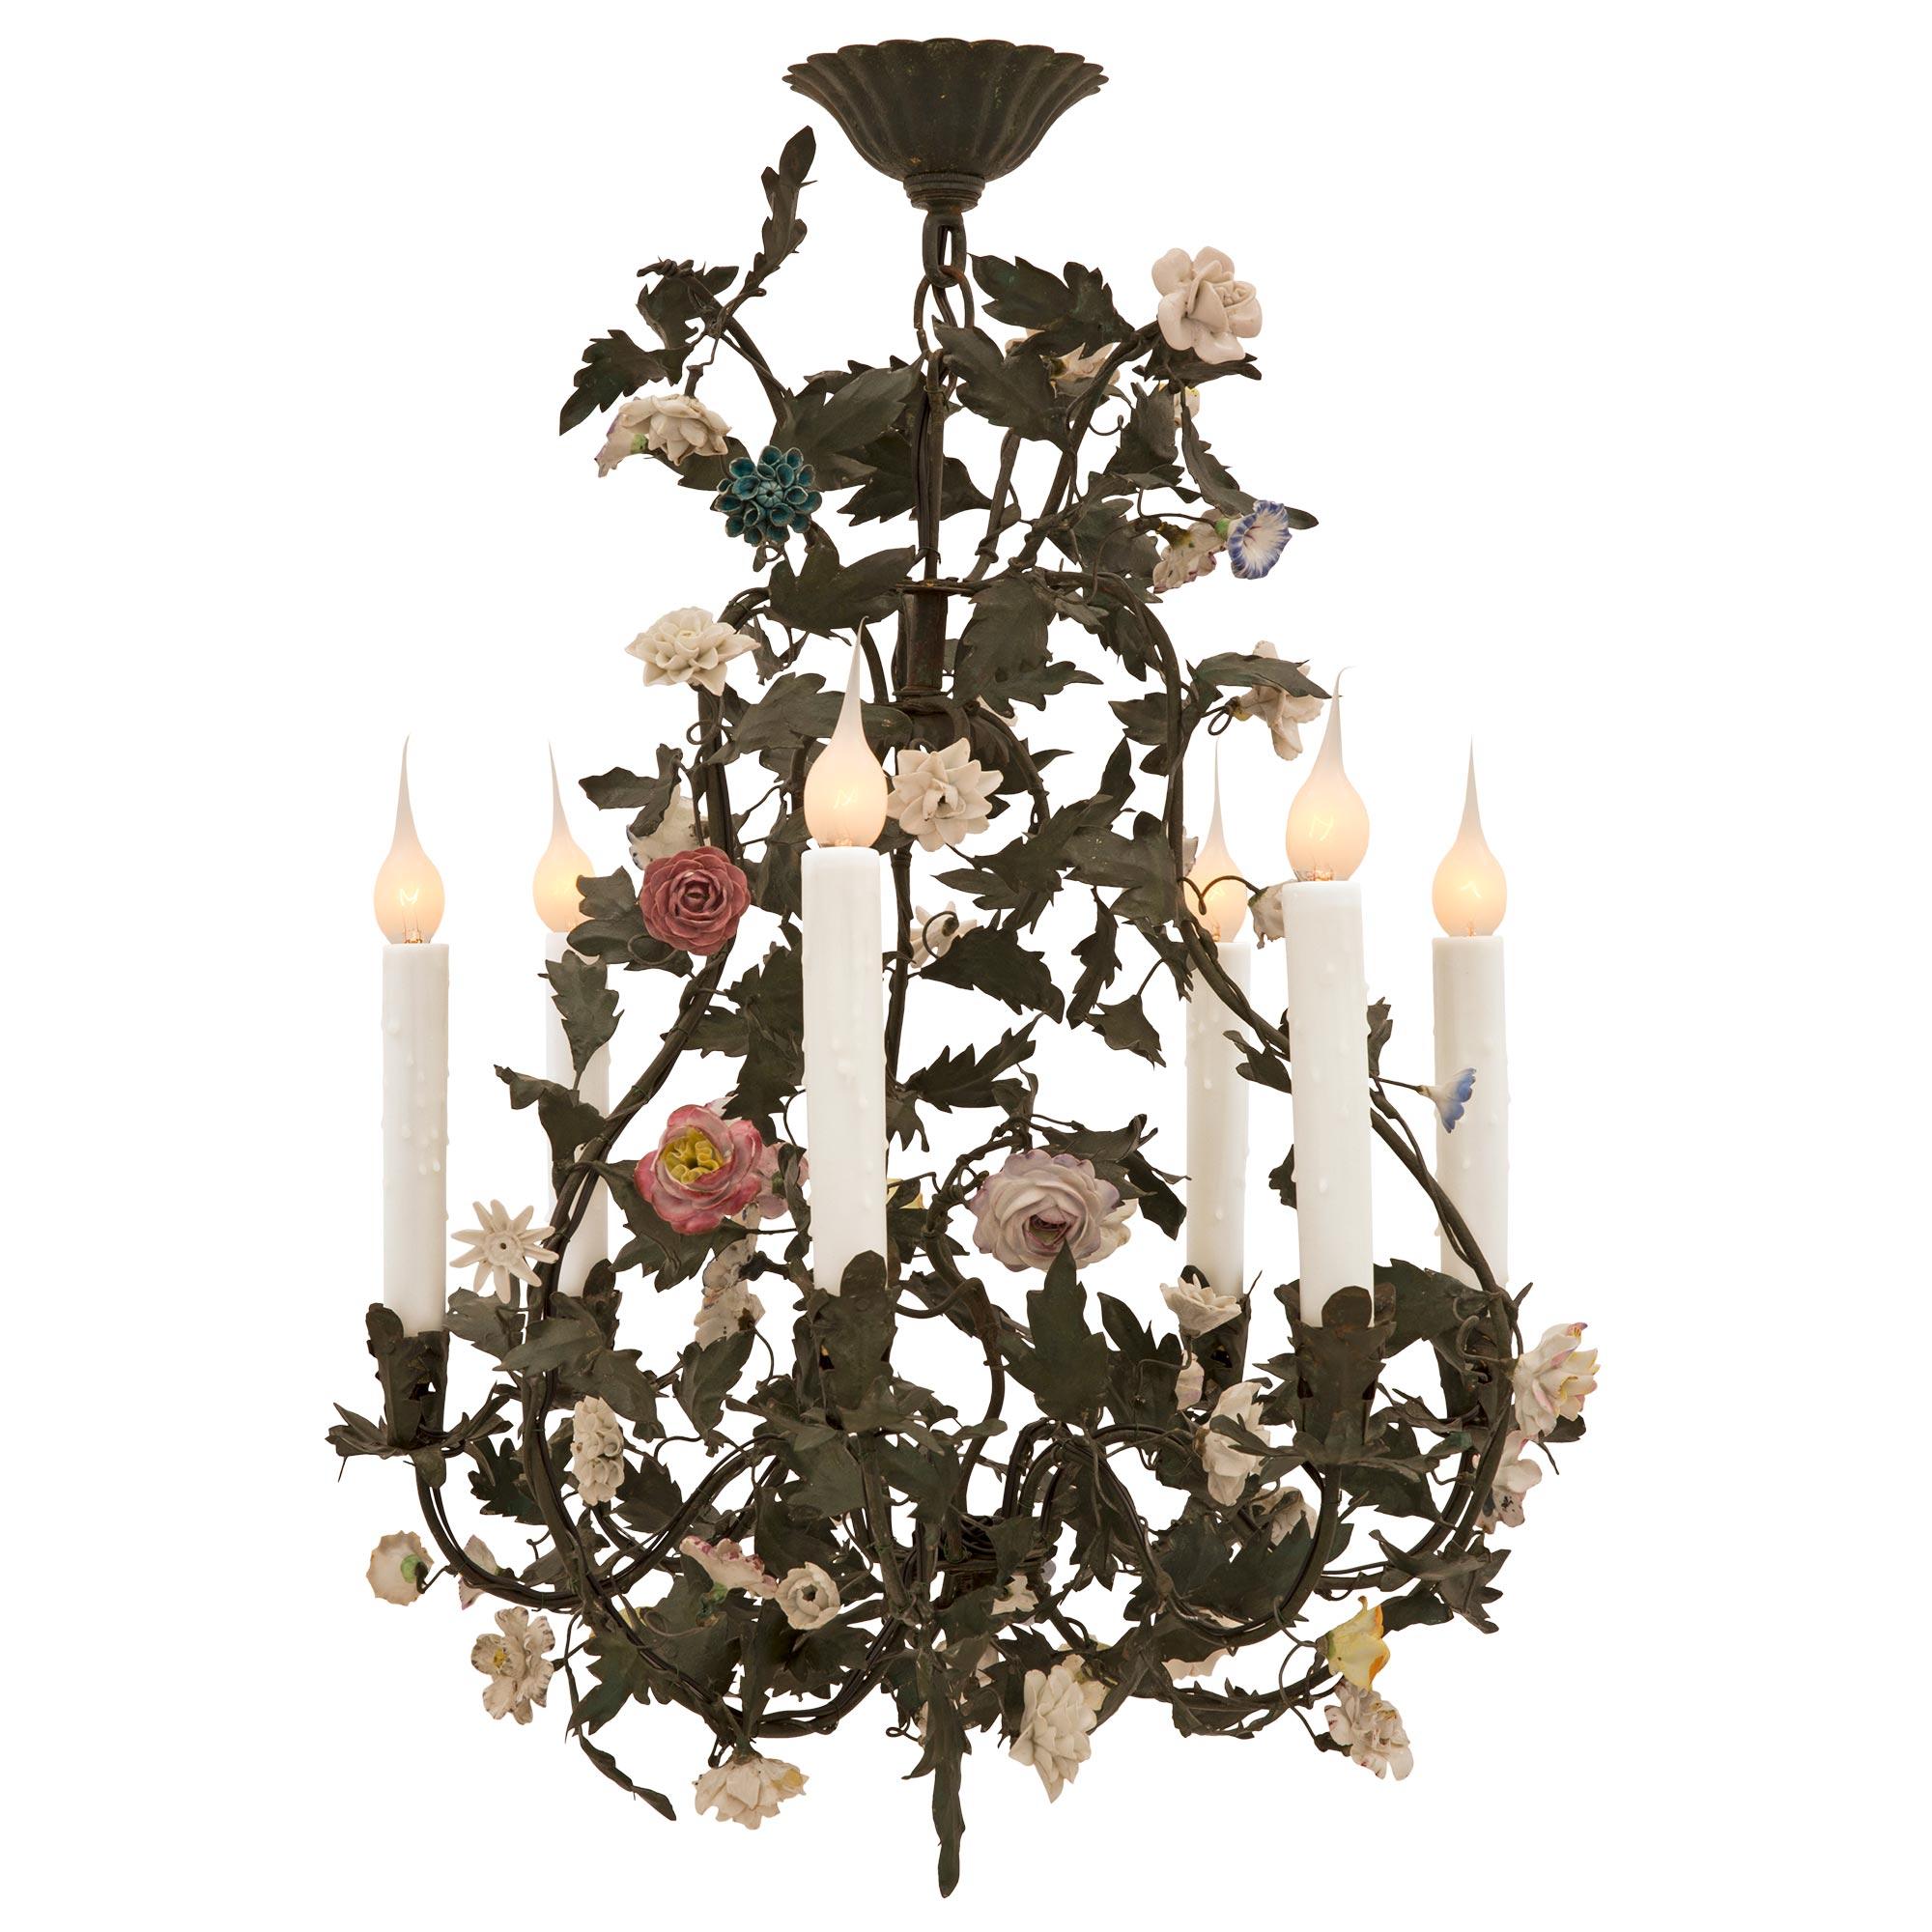 A charming French 19th century Louis XVI st. tole and Saxe porcelain chandelier. The six arm chandelier displays a lovely curvaceous cage adorned with elegant tole leaves and a stunning array of colorful intricately detailed hand painted Saxe